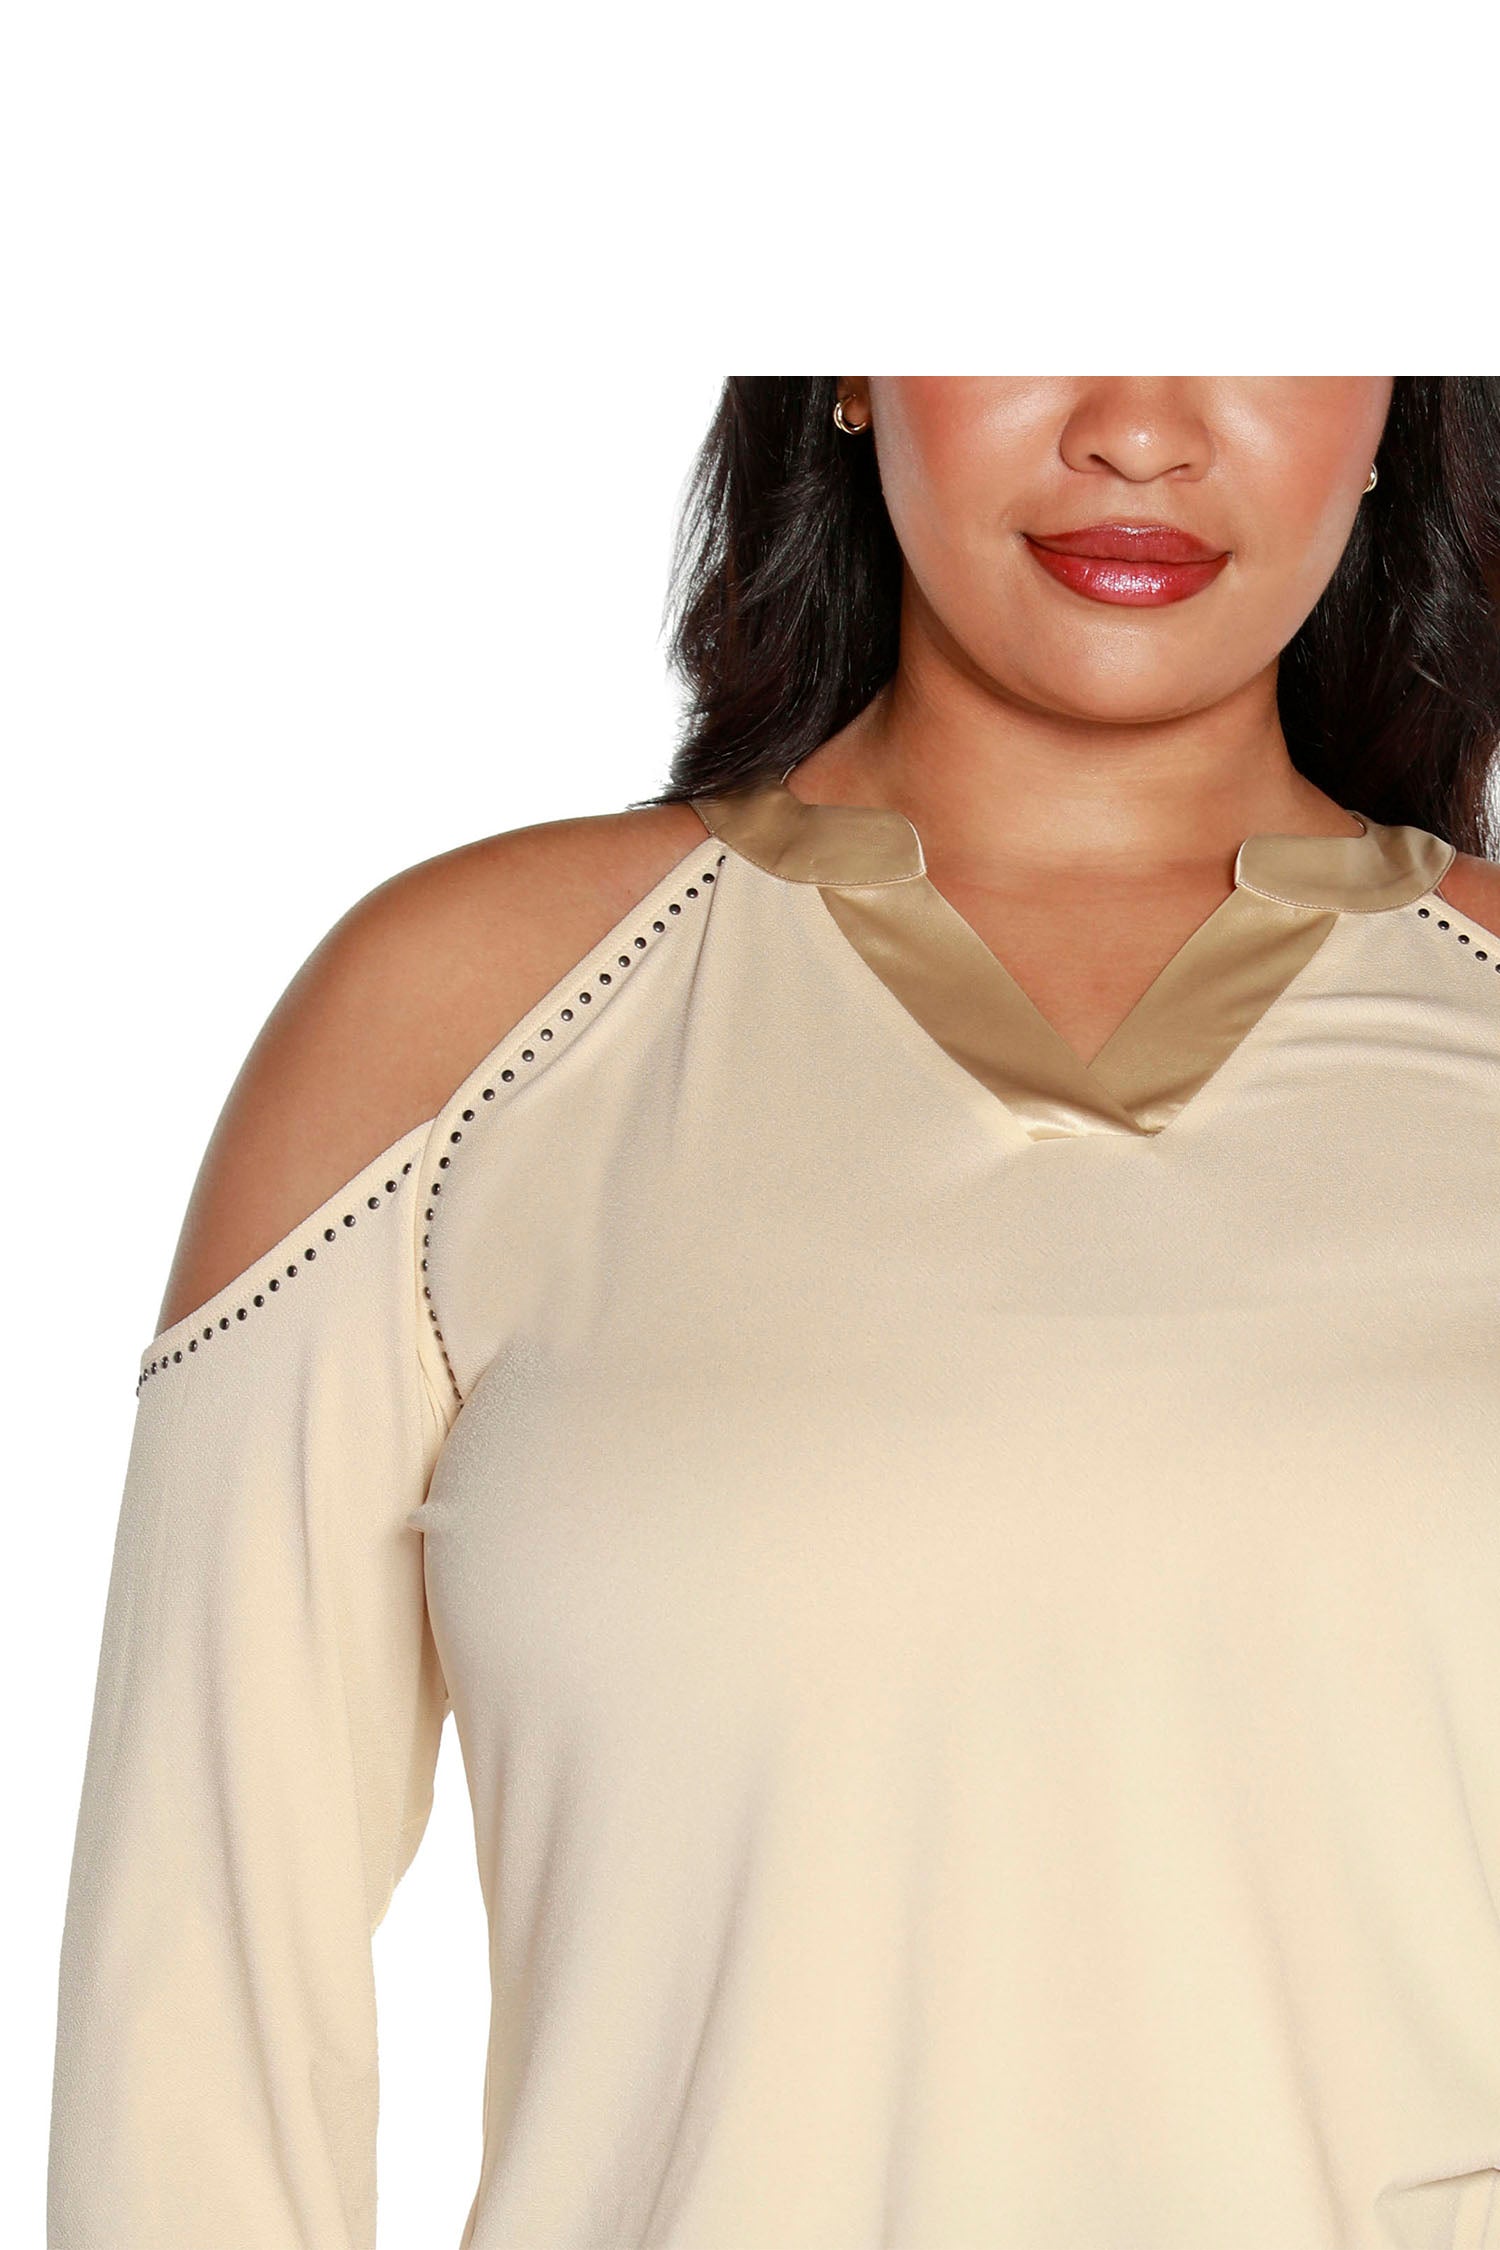 Women’s Cold Shoulder Blouse with V-Neck and Satin Trim | Curvy